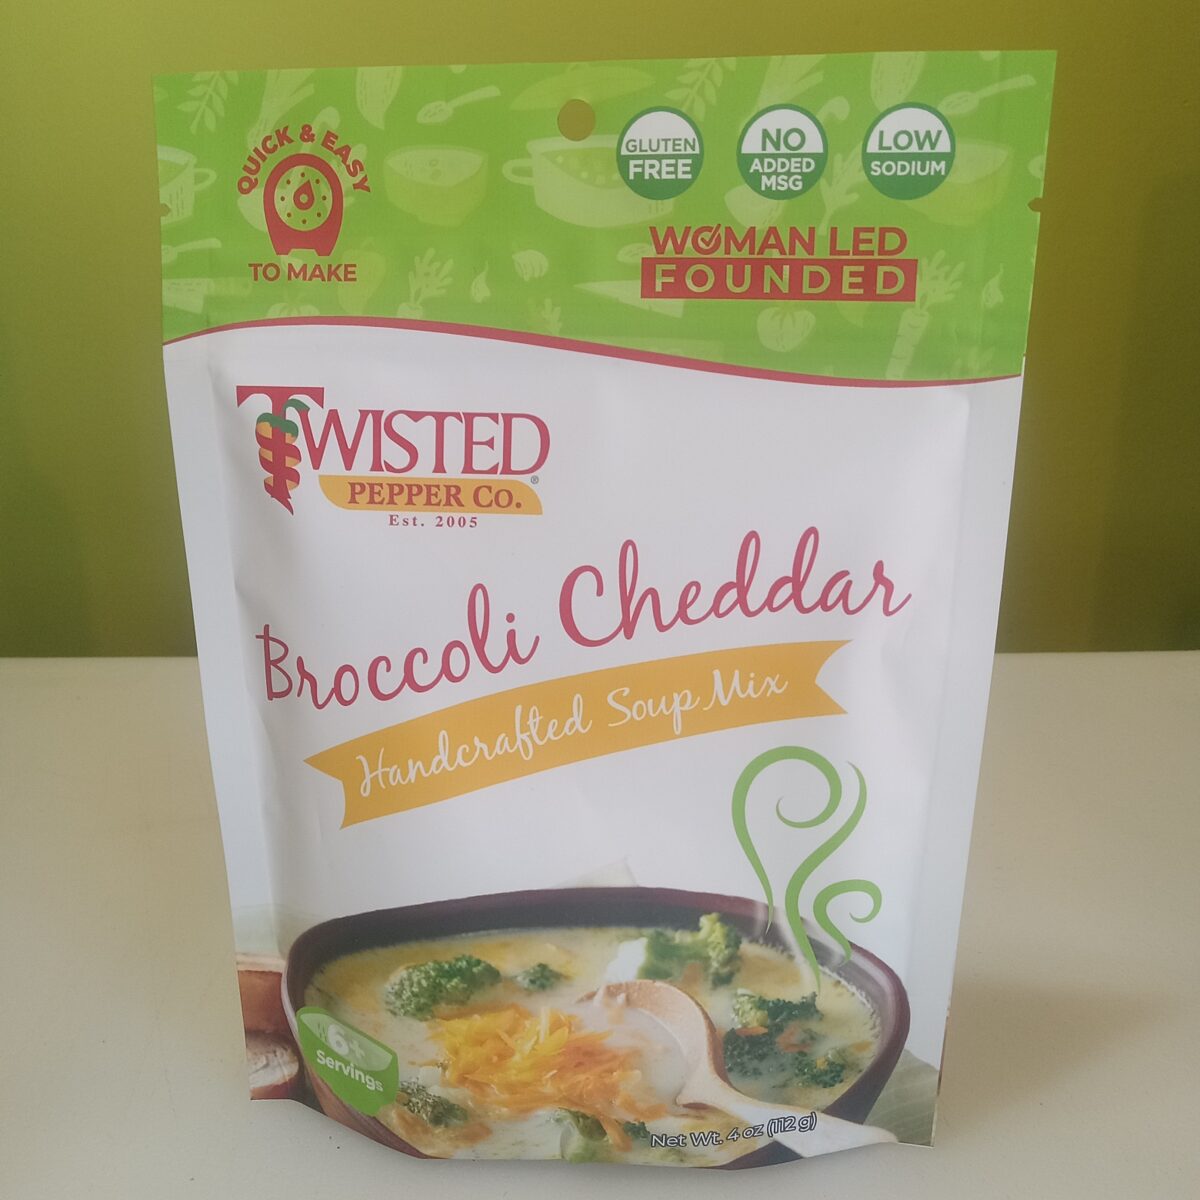 Broccoli Cheddar Soup Mix-Twisted Pepper